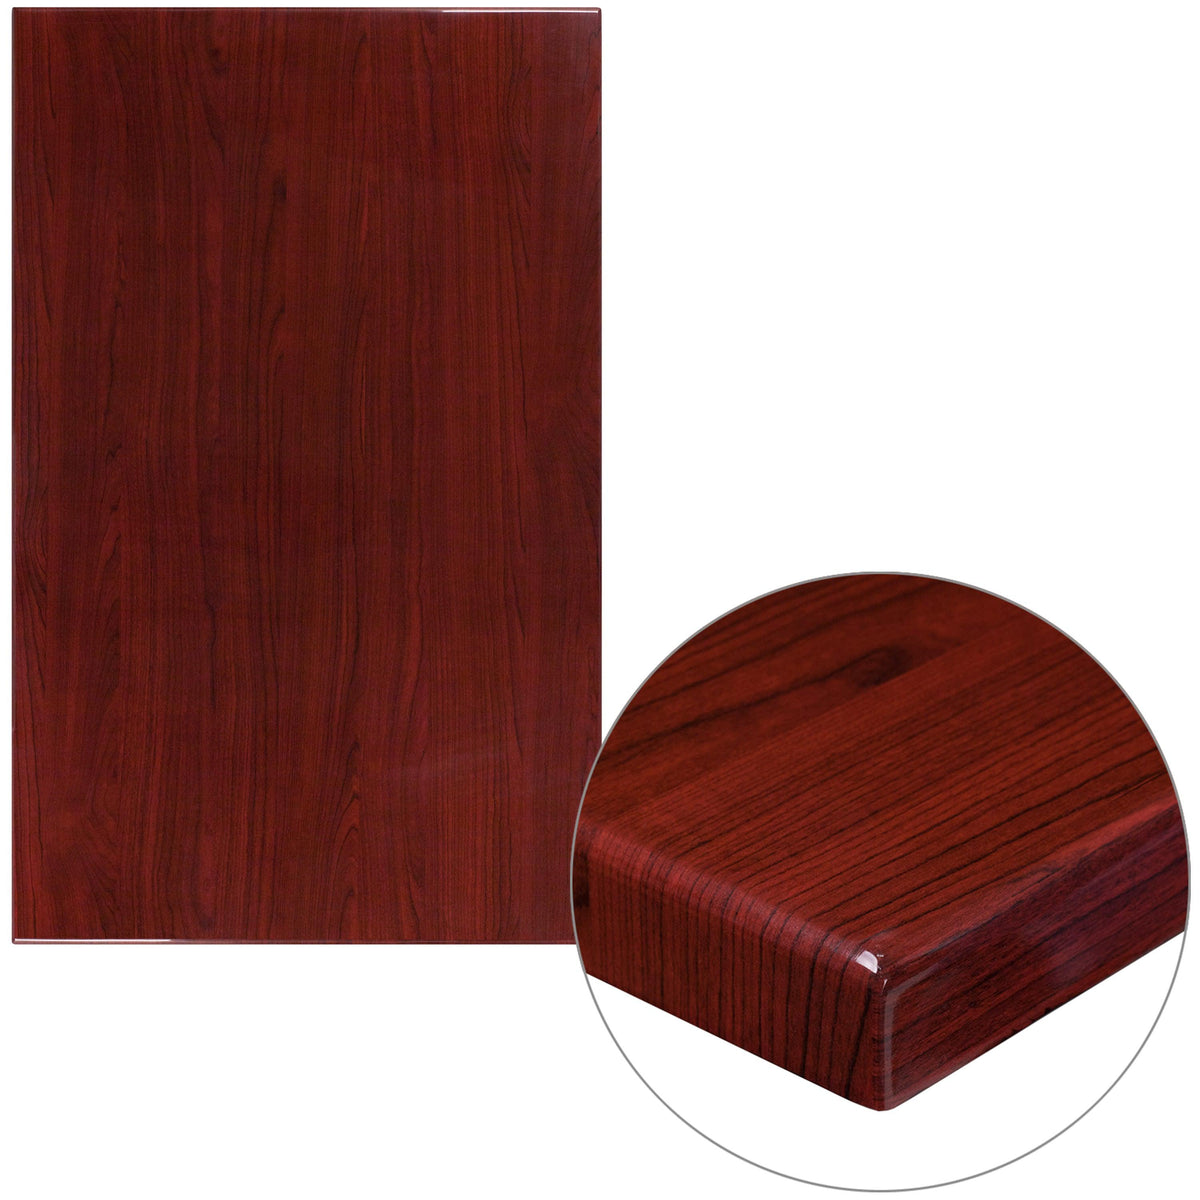 Mahogany |#| 30inch x 48inch Rectangular High-Gloss Mahogany Resin Table Top with 2inch Thick Edge